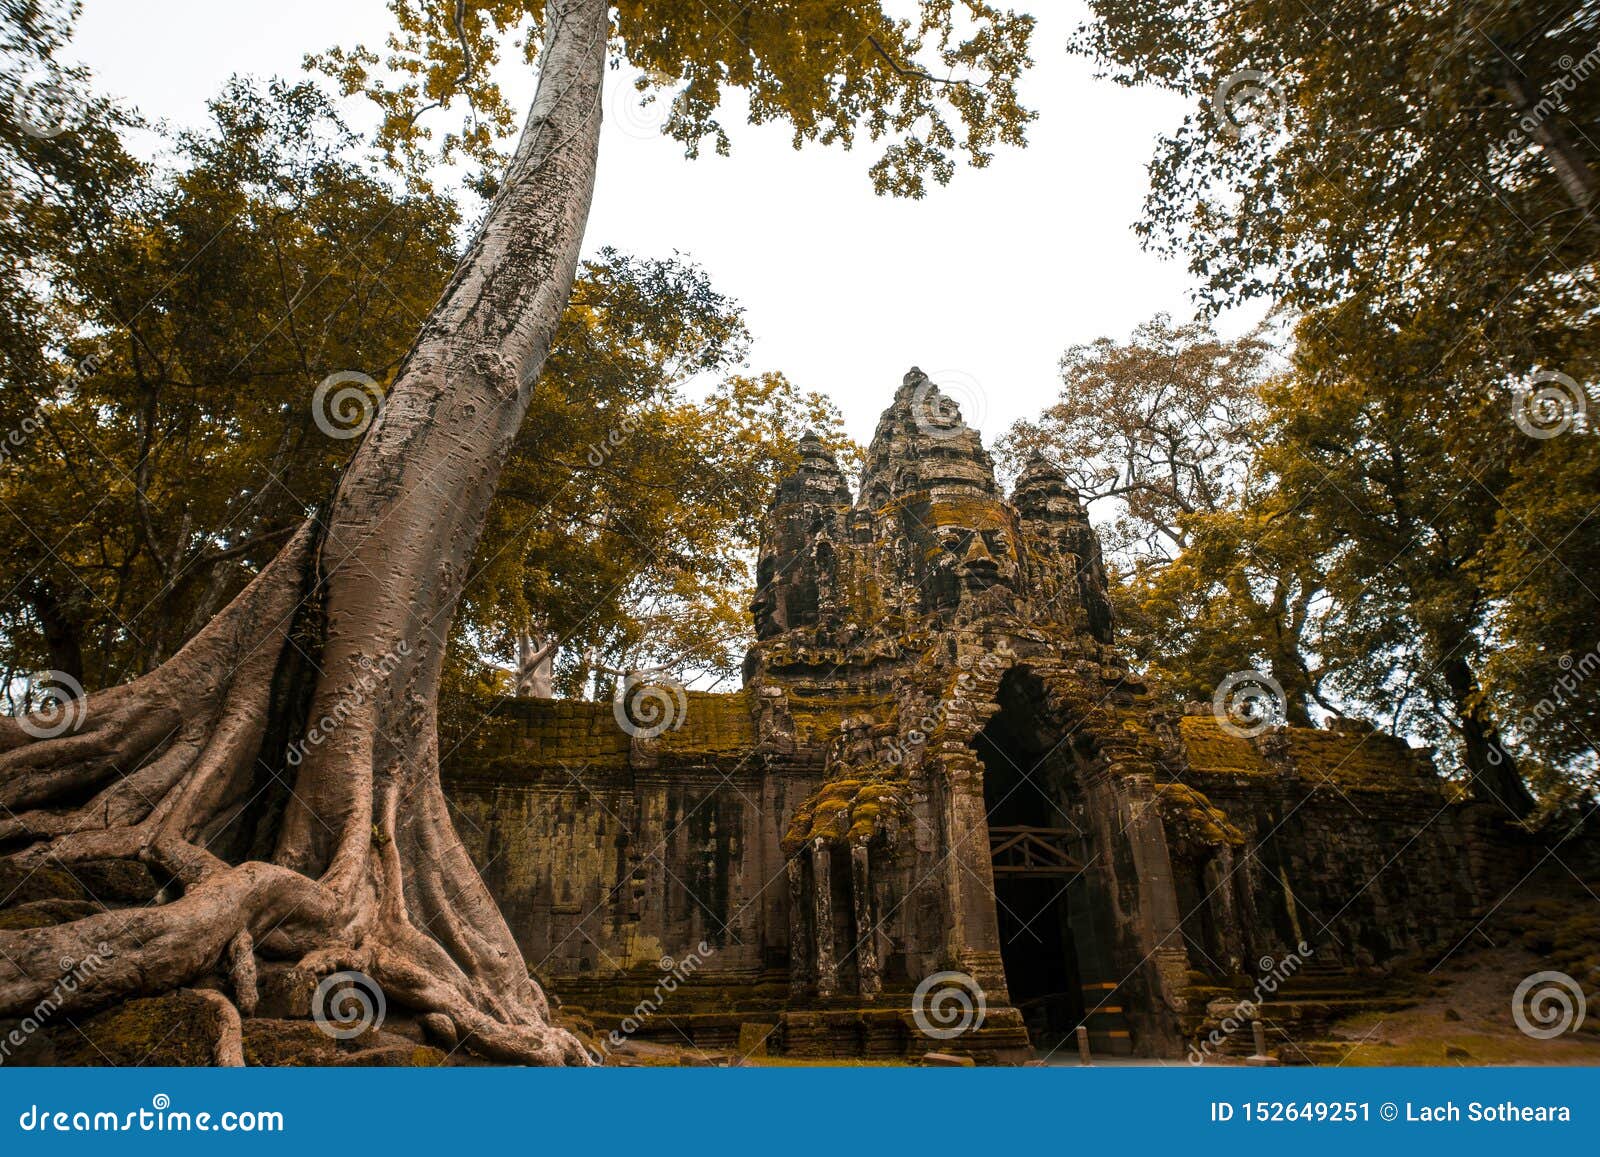 giant tree with deep story temple in cambodia. unis co world heritage